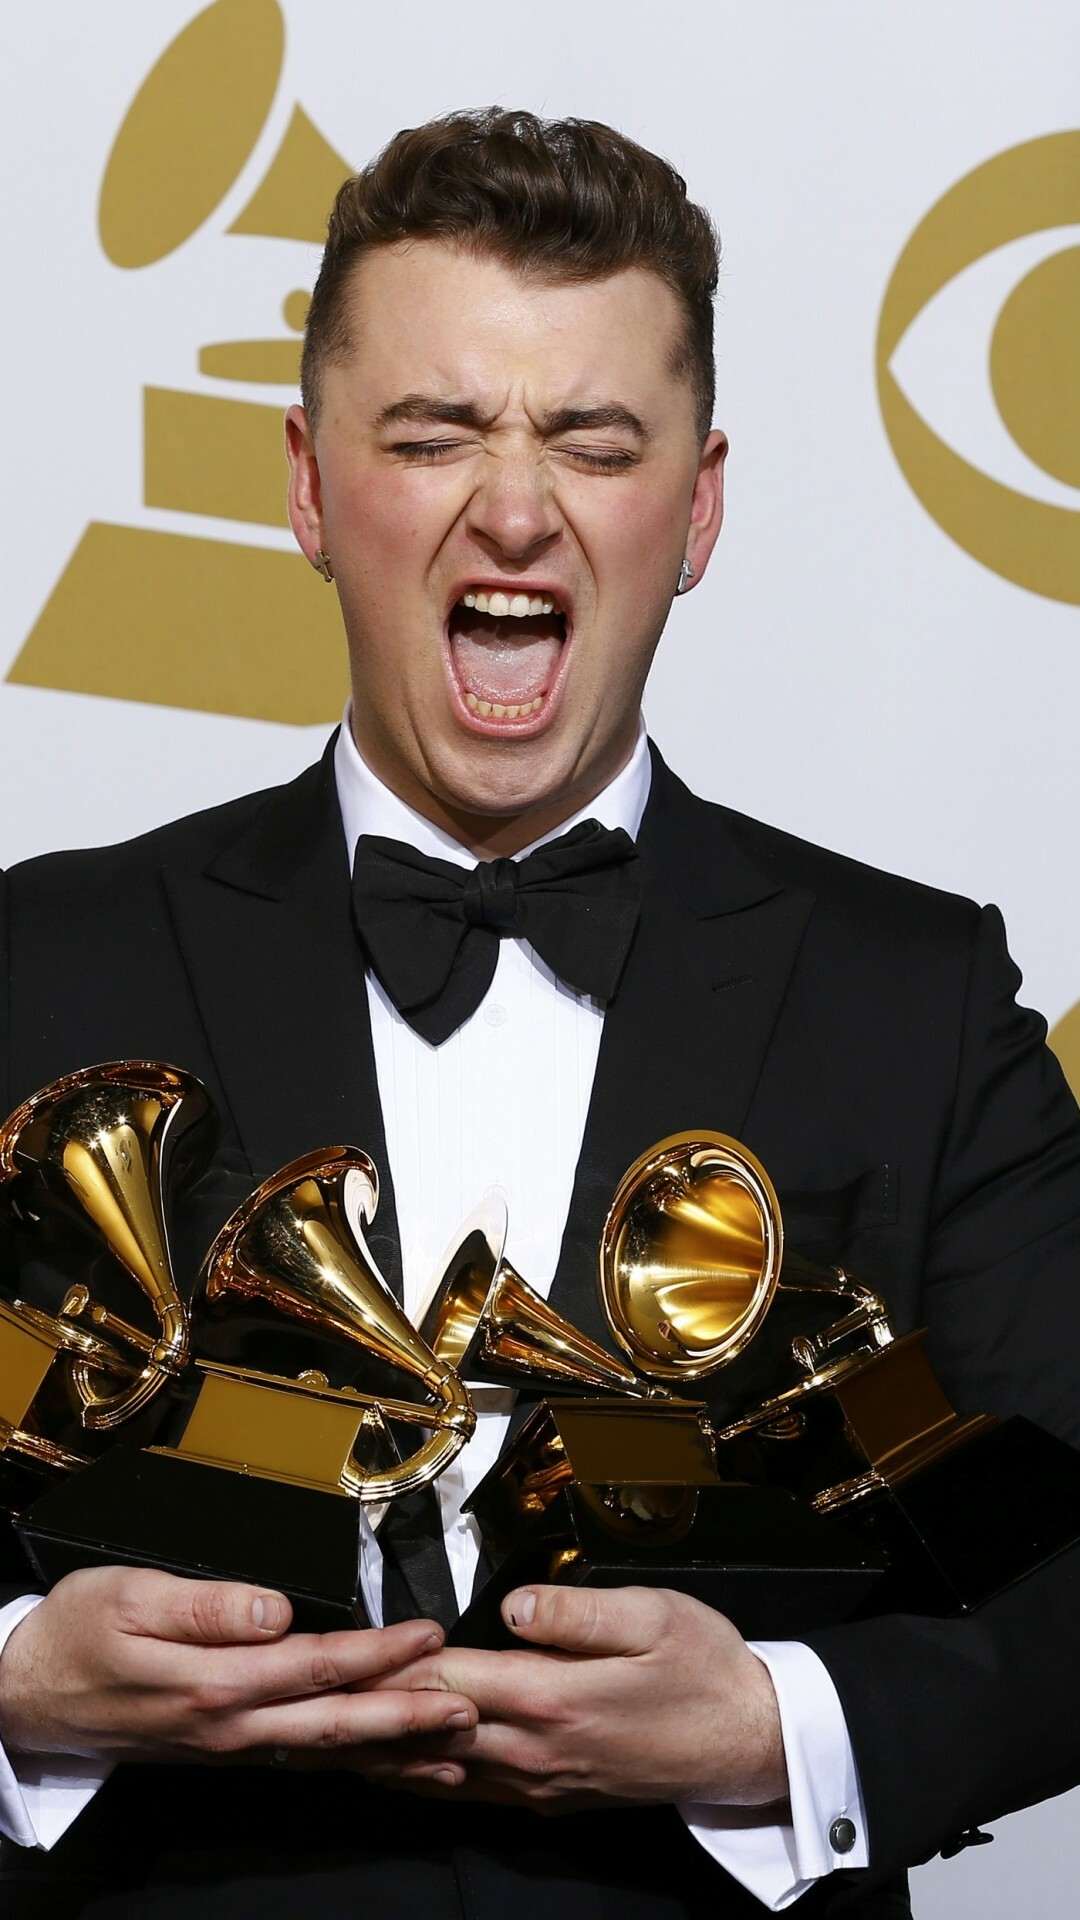 Sam Smith: Stay With Me, Record of the Year, Song of the Year, Best New Artist at Grammys 2015. 1080x1920 Full HD Wallpaper.